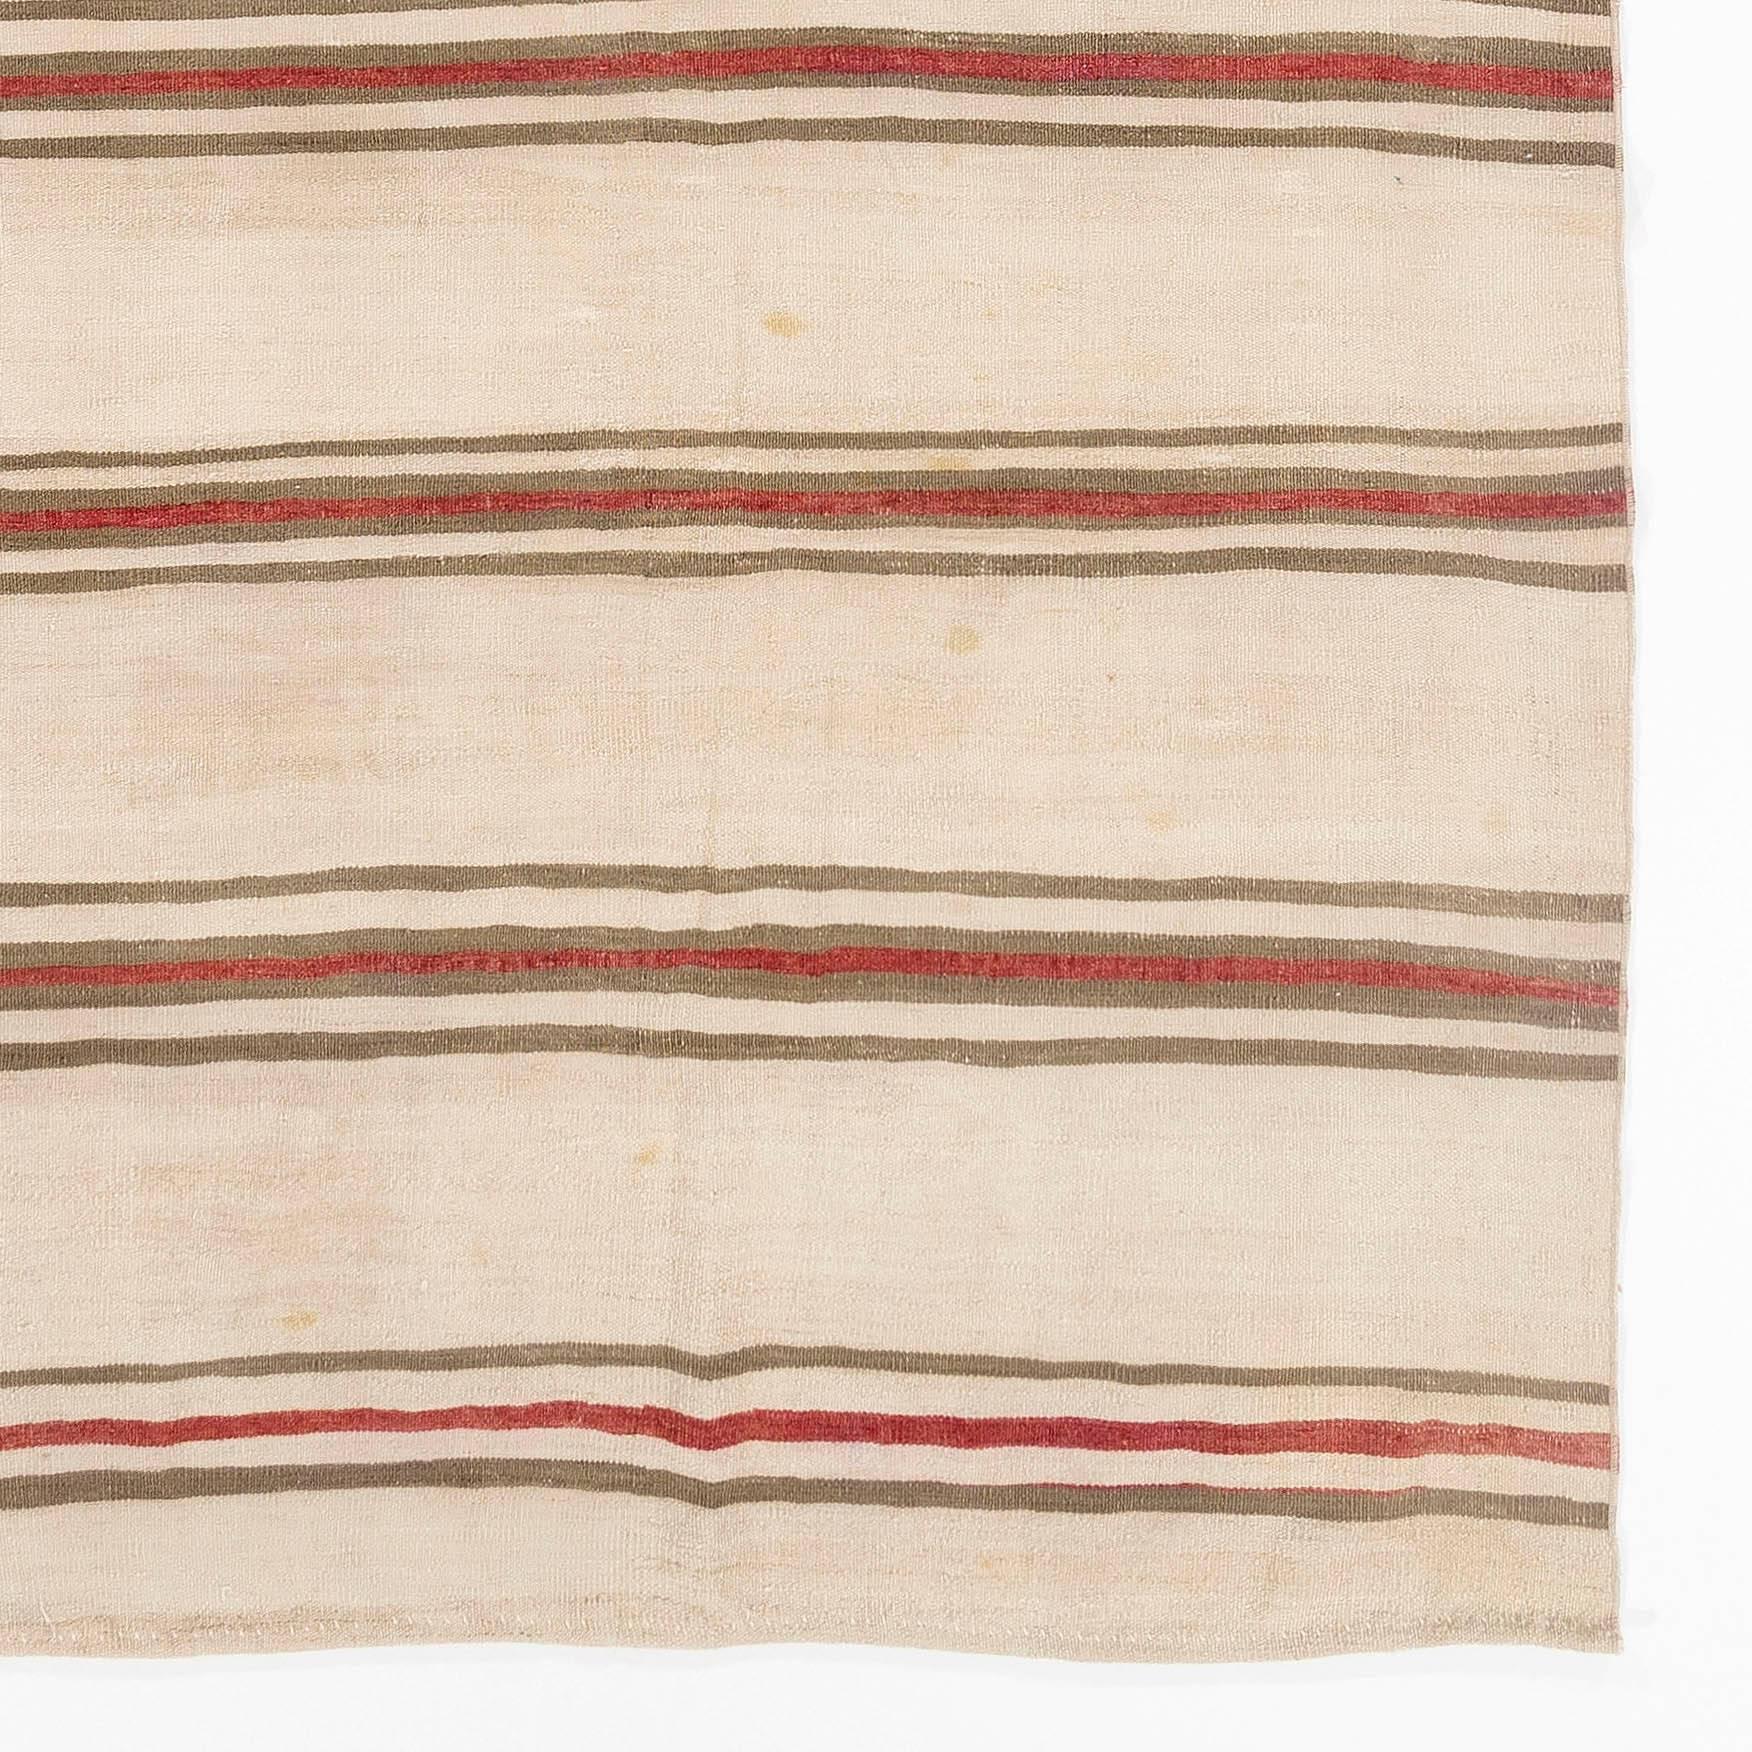 Turkish 4.7x12 Ft Banded Vintage Handmade Runner Kilim in Shades of Brown, Beige and Red For Sale